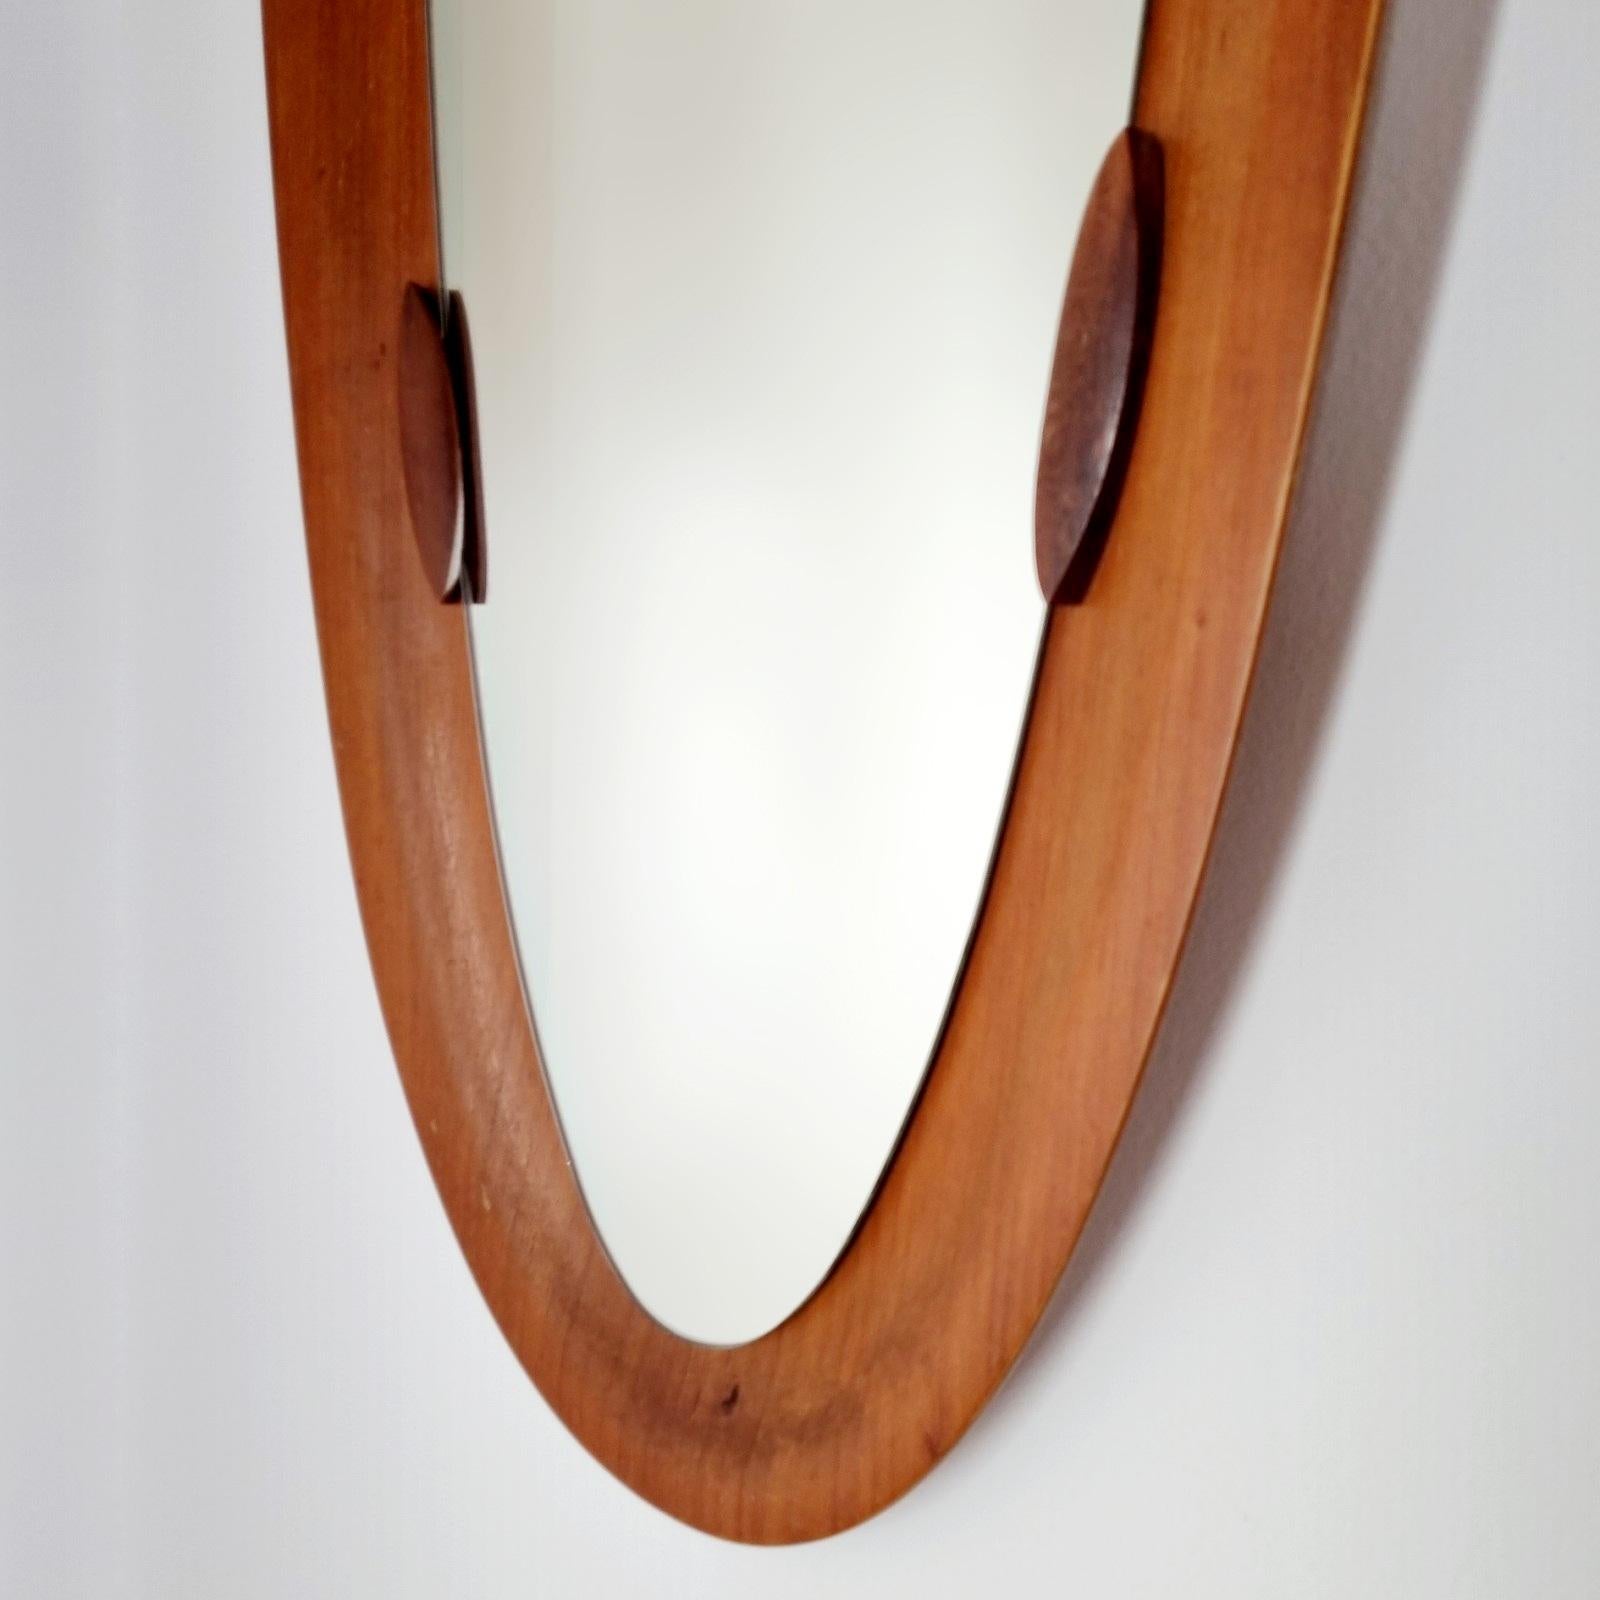 Mid-Century Modern Mid-Century Oval Teak Wall Mirror, Designed by Campo e Graffi, Italy 60s For Sale